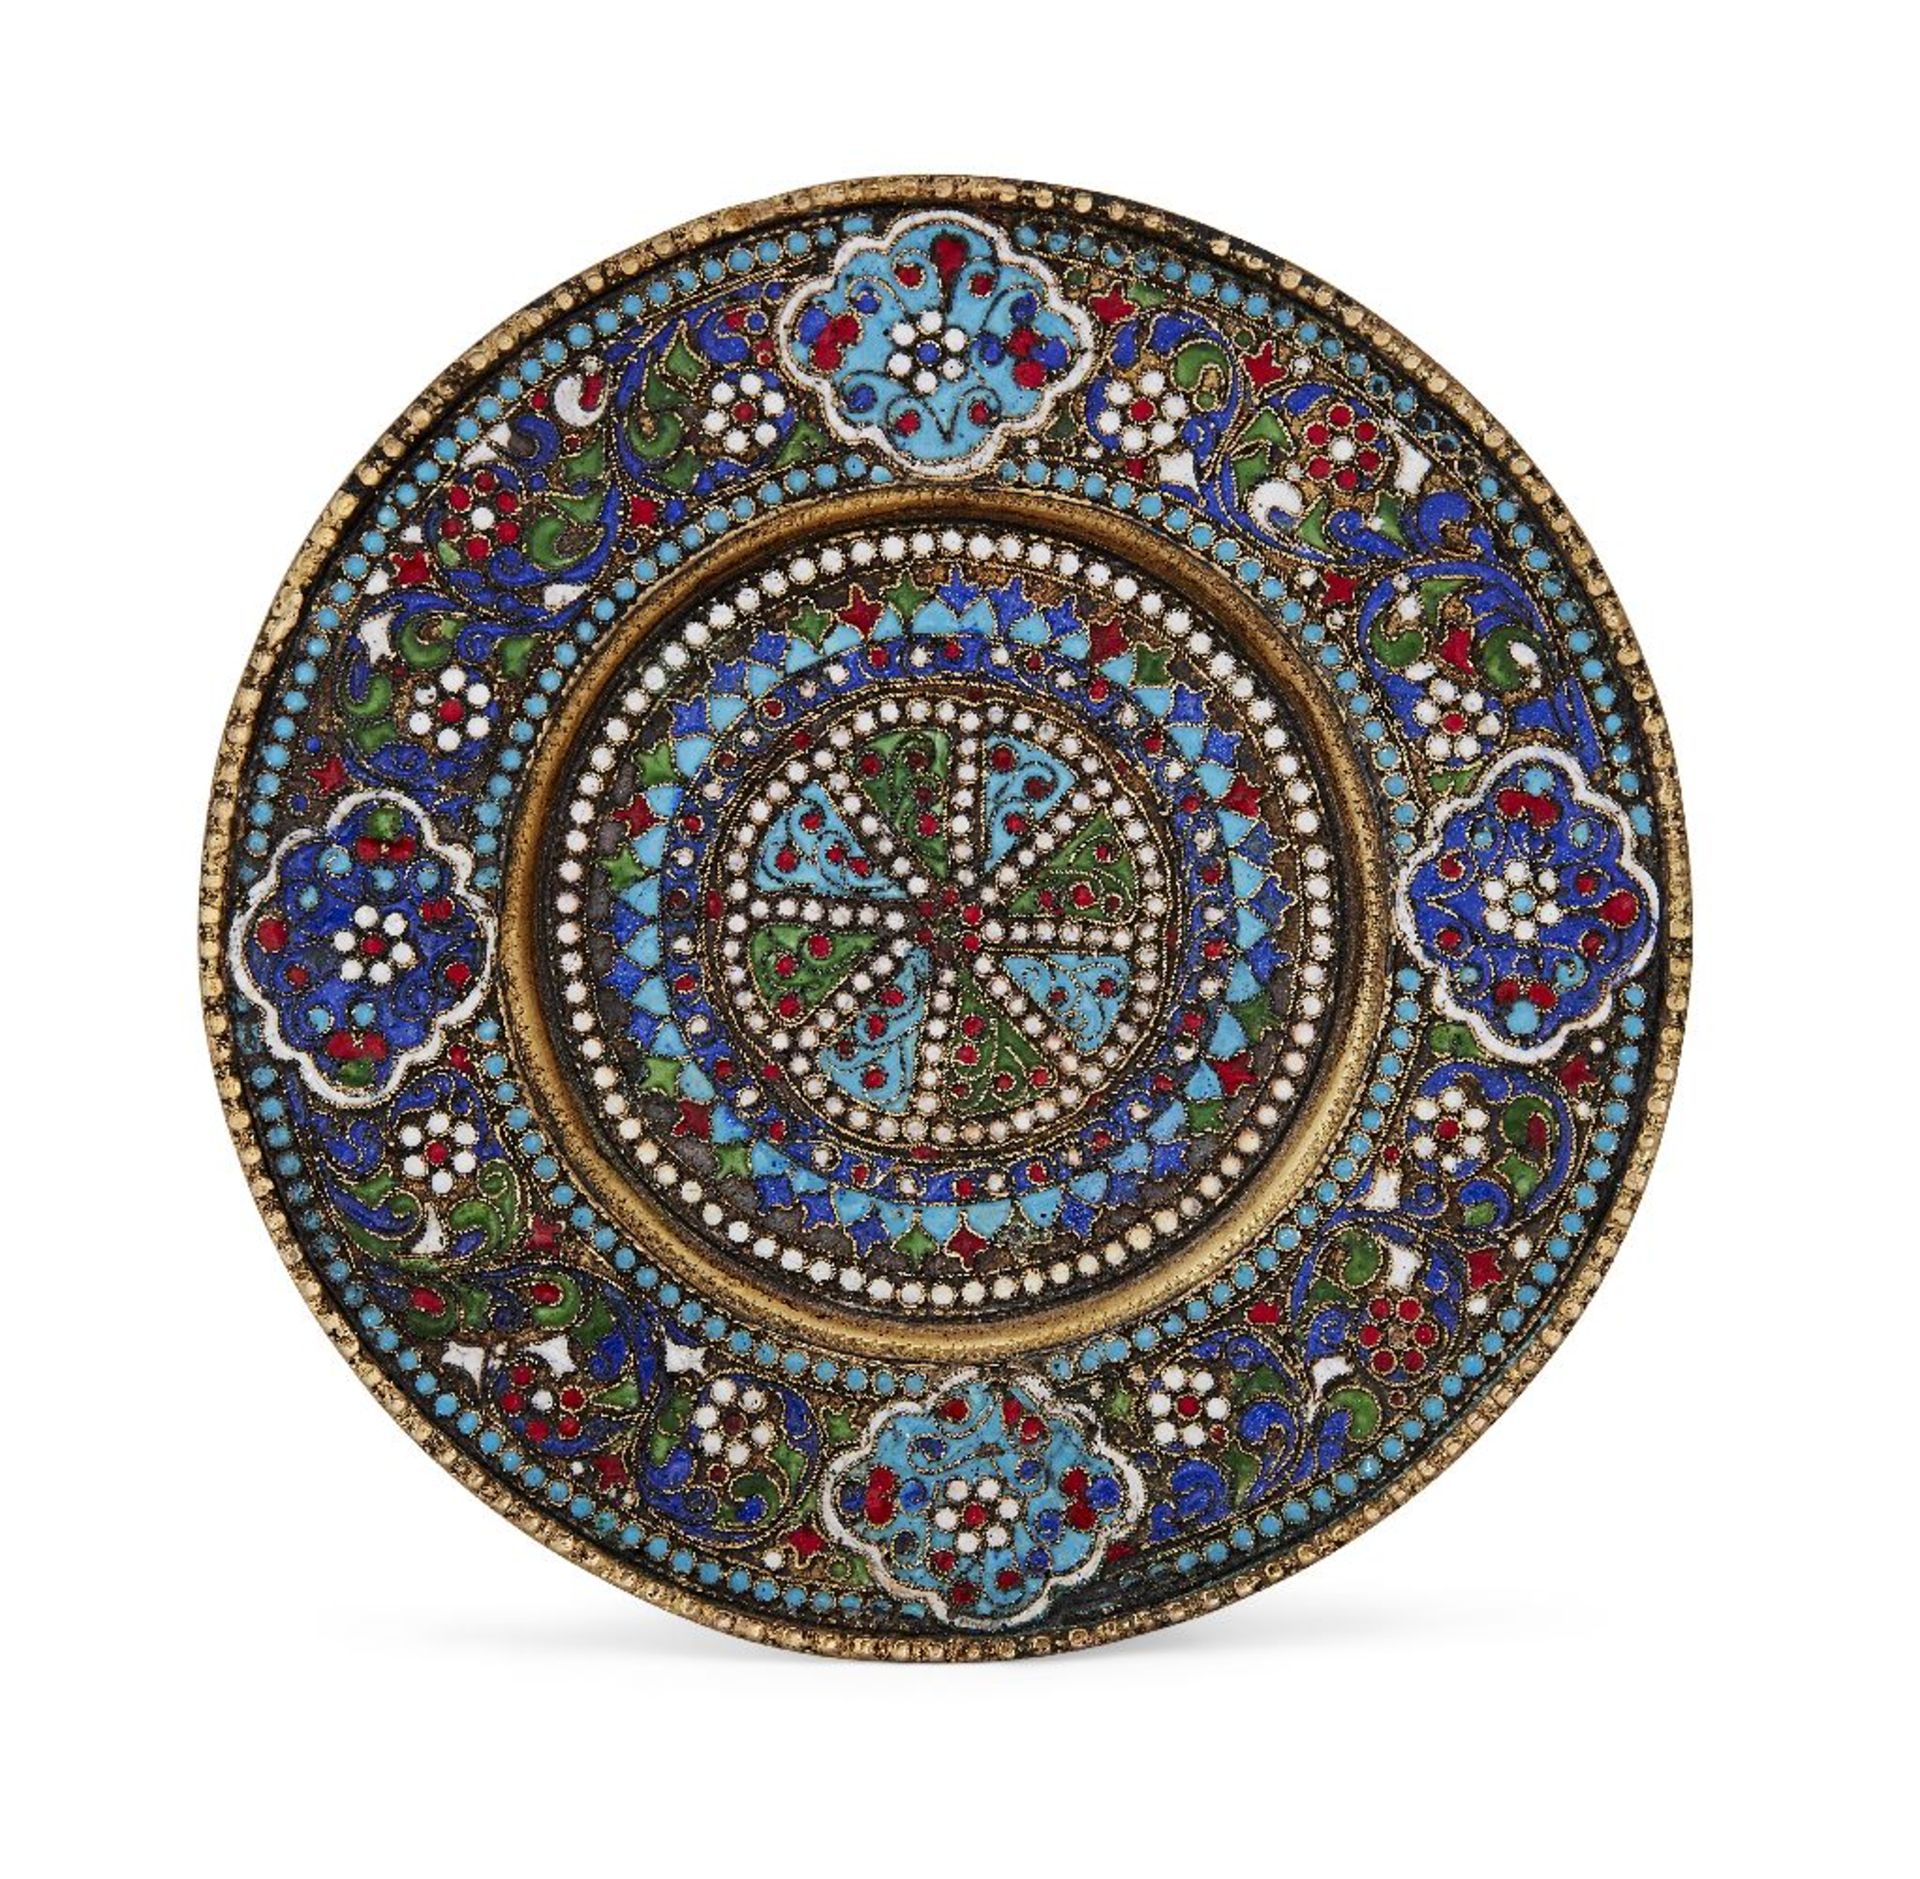 A cloisonné enamelled dish, probably Russian, late 19th century, the reverse with spurious marks (